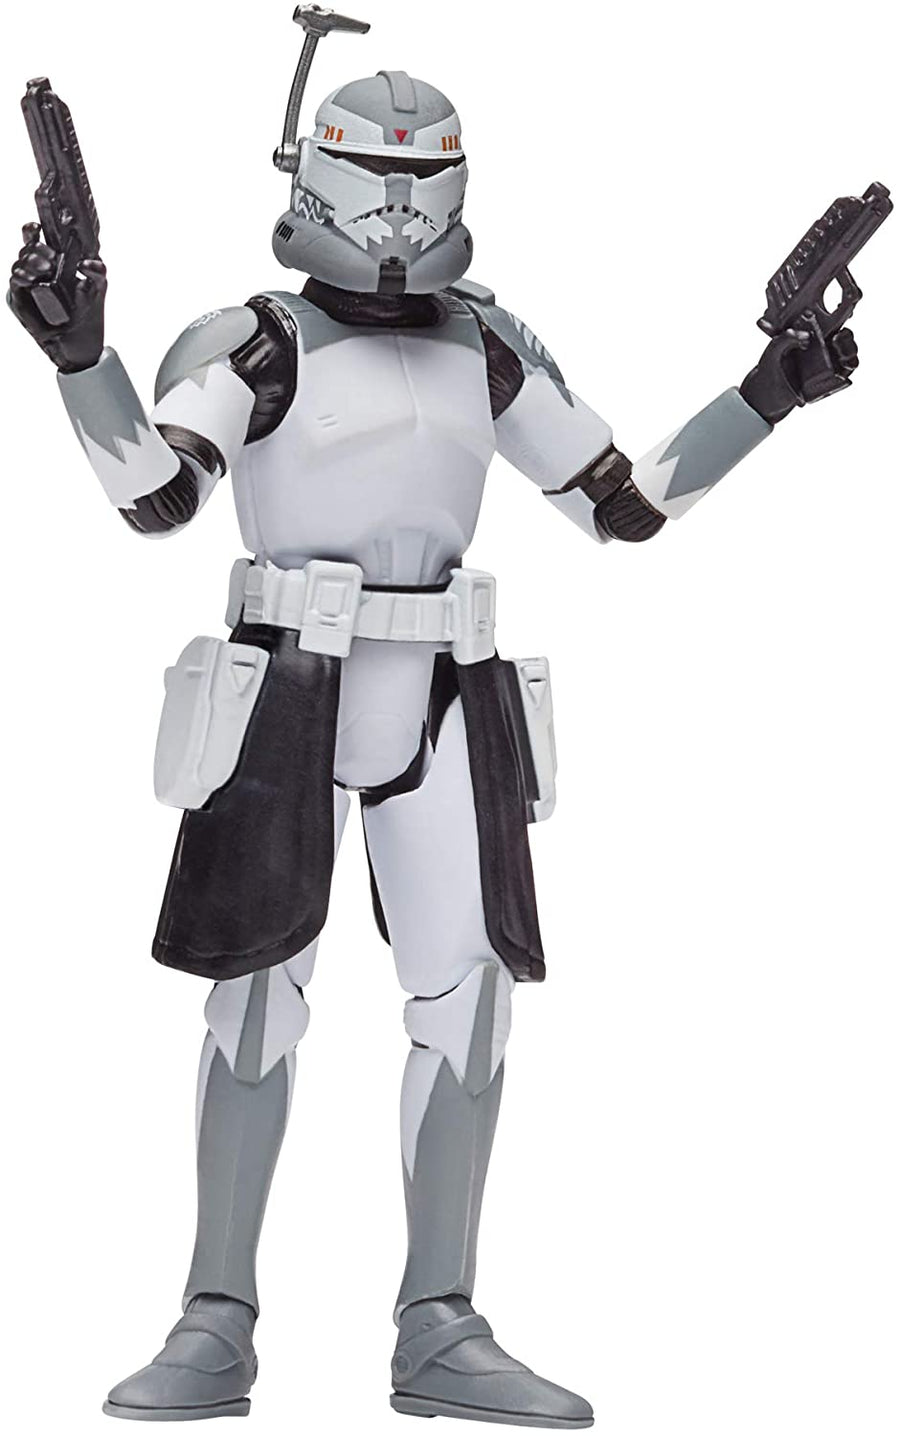 Star Wars The Vintage Collection Commander Wolffe Action Figure